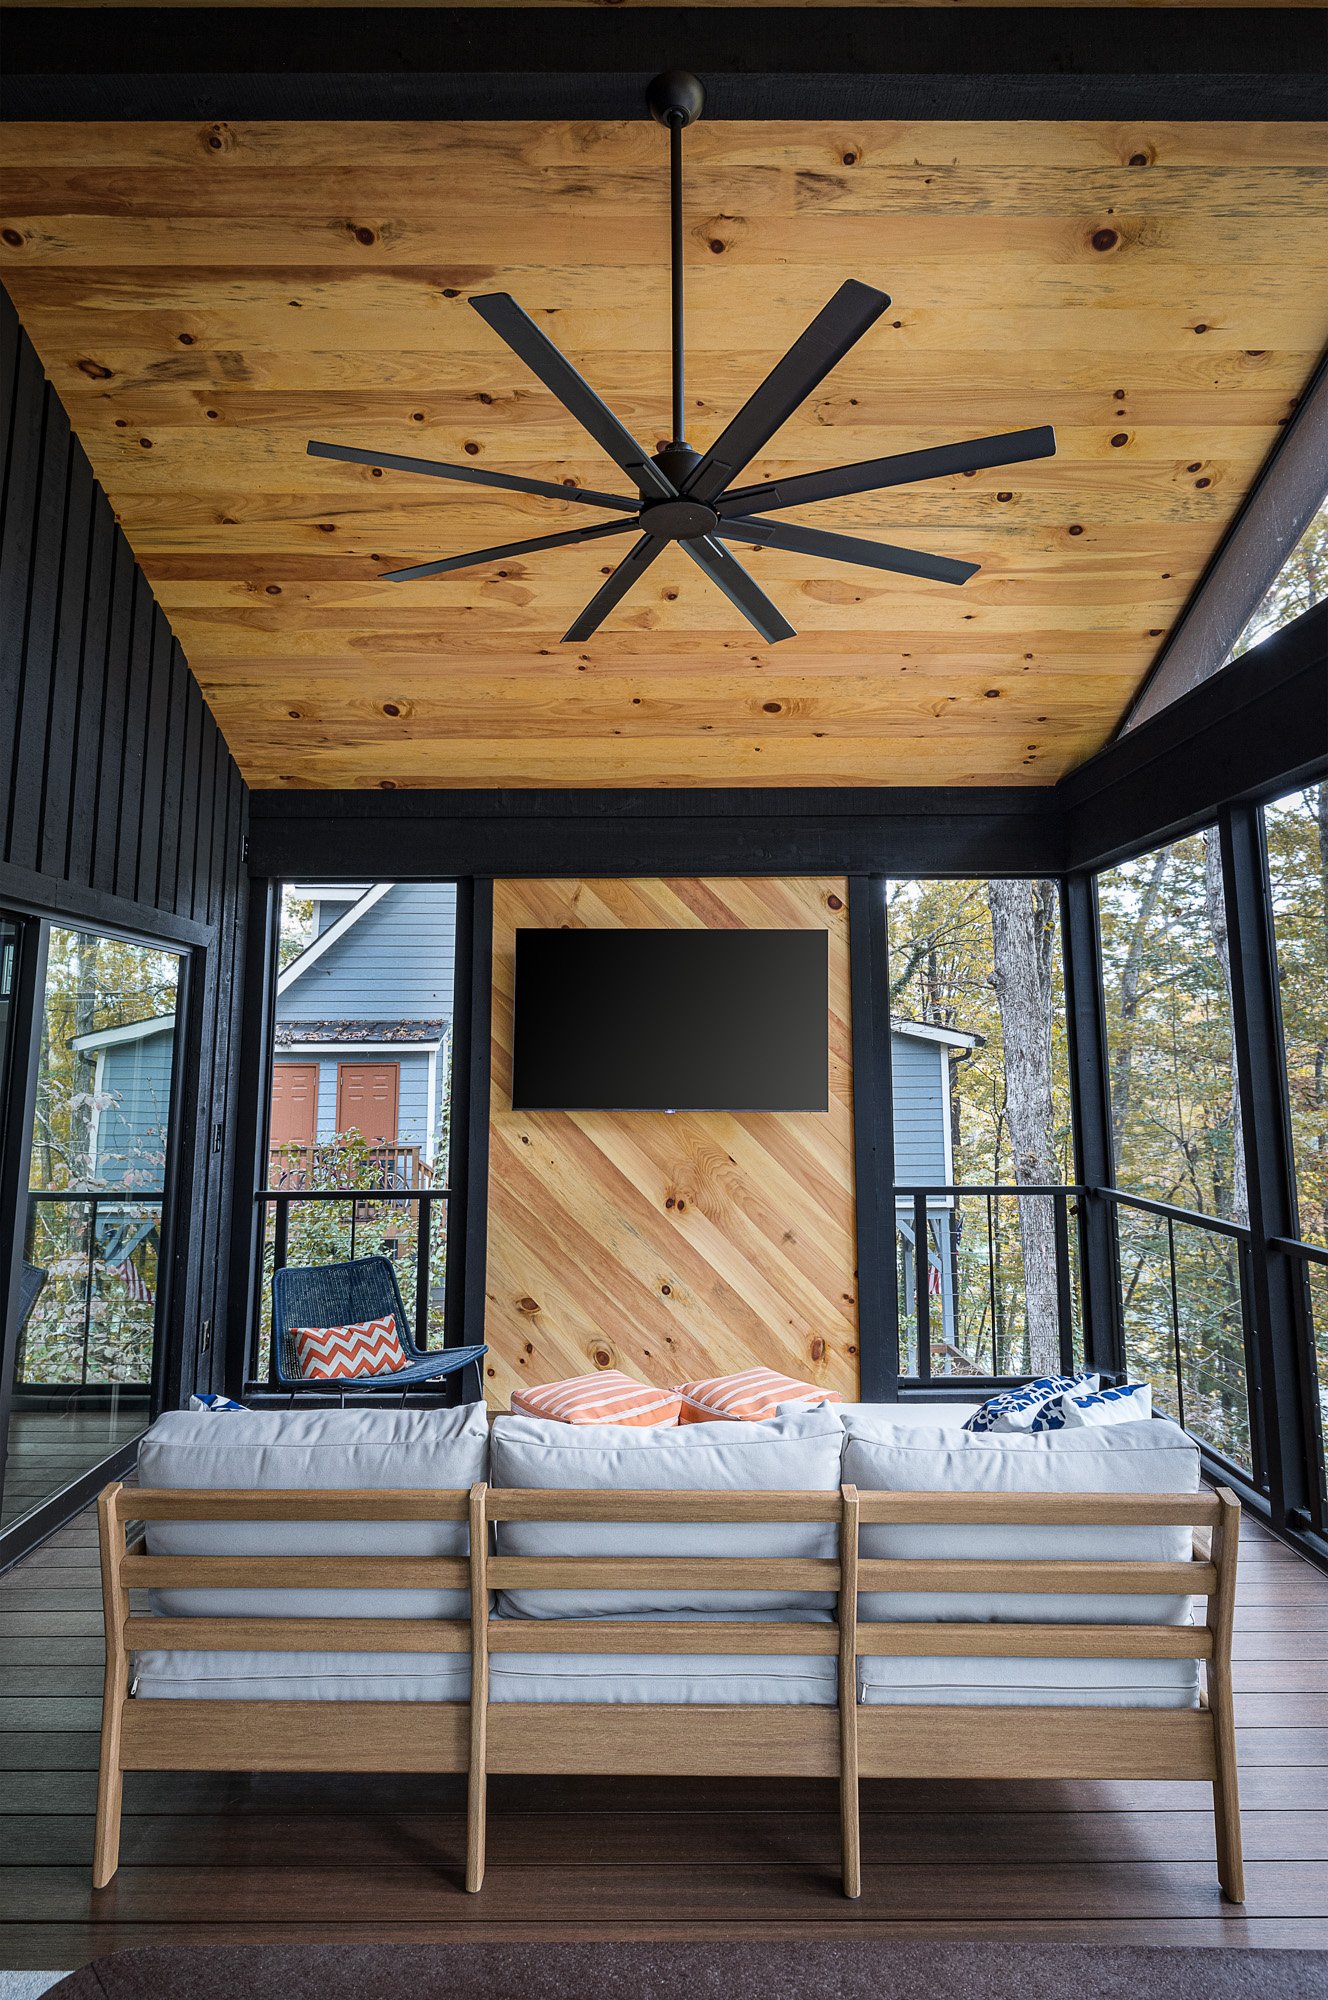 Chic porch with vaulted pine ceiling, large ceiling fan, and stylish outdoor seating area.